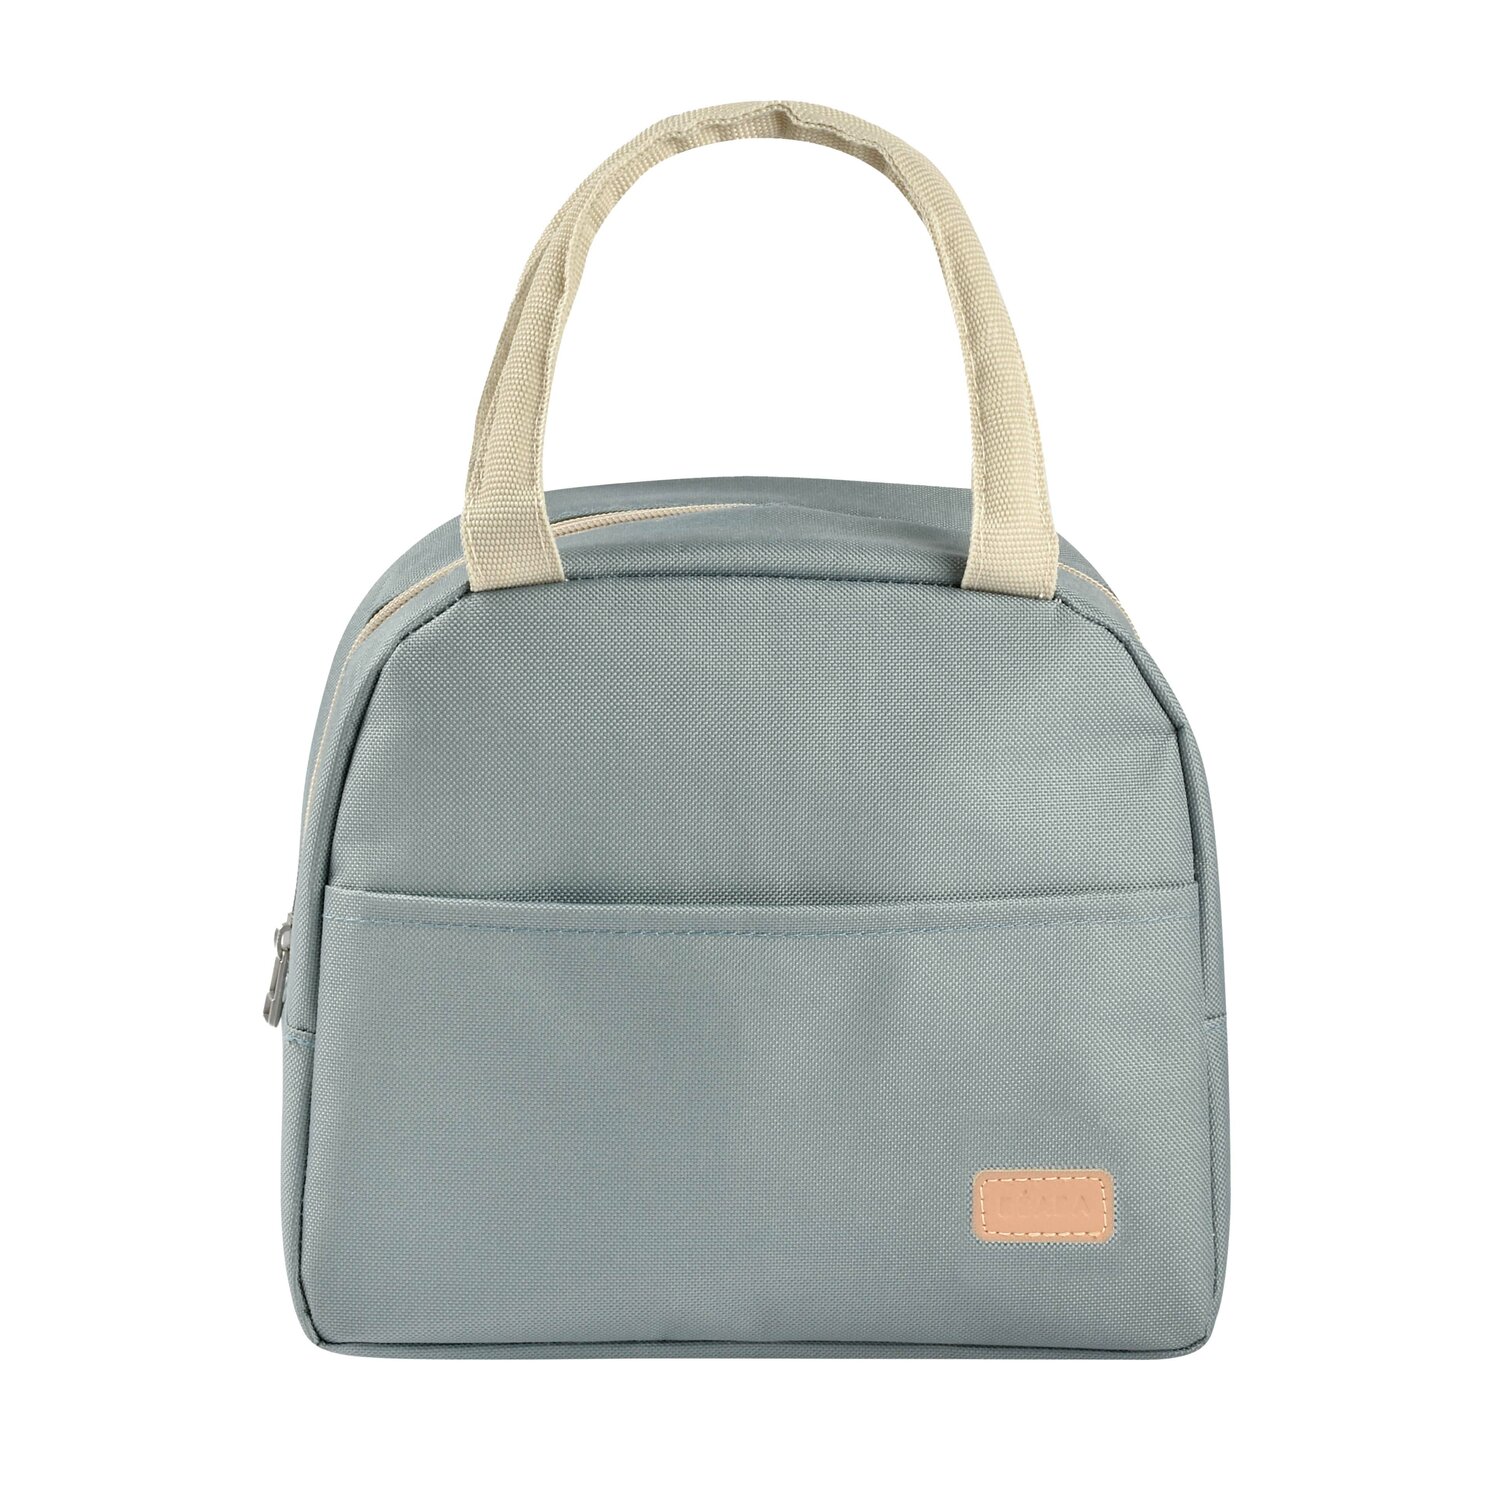 Sac repas isotherme frosty green Béaba